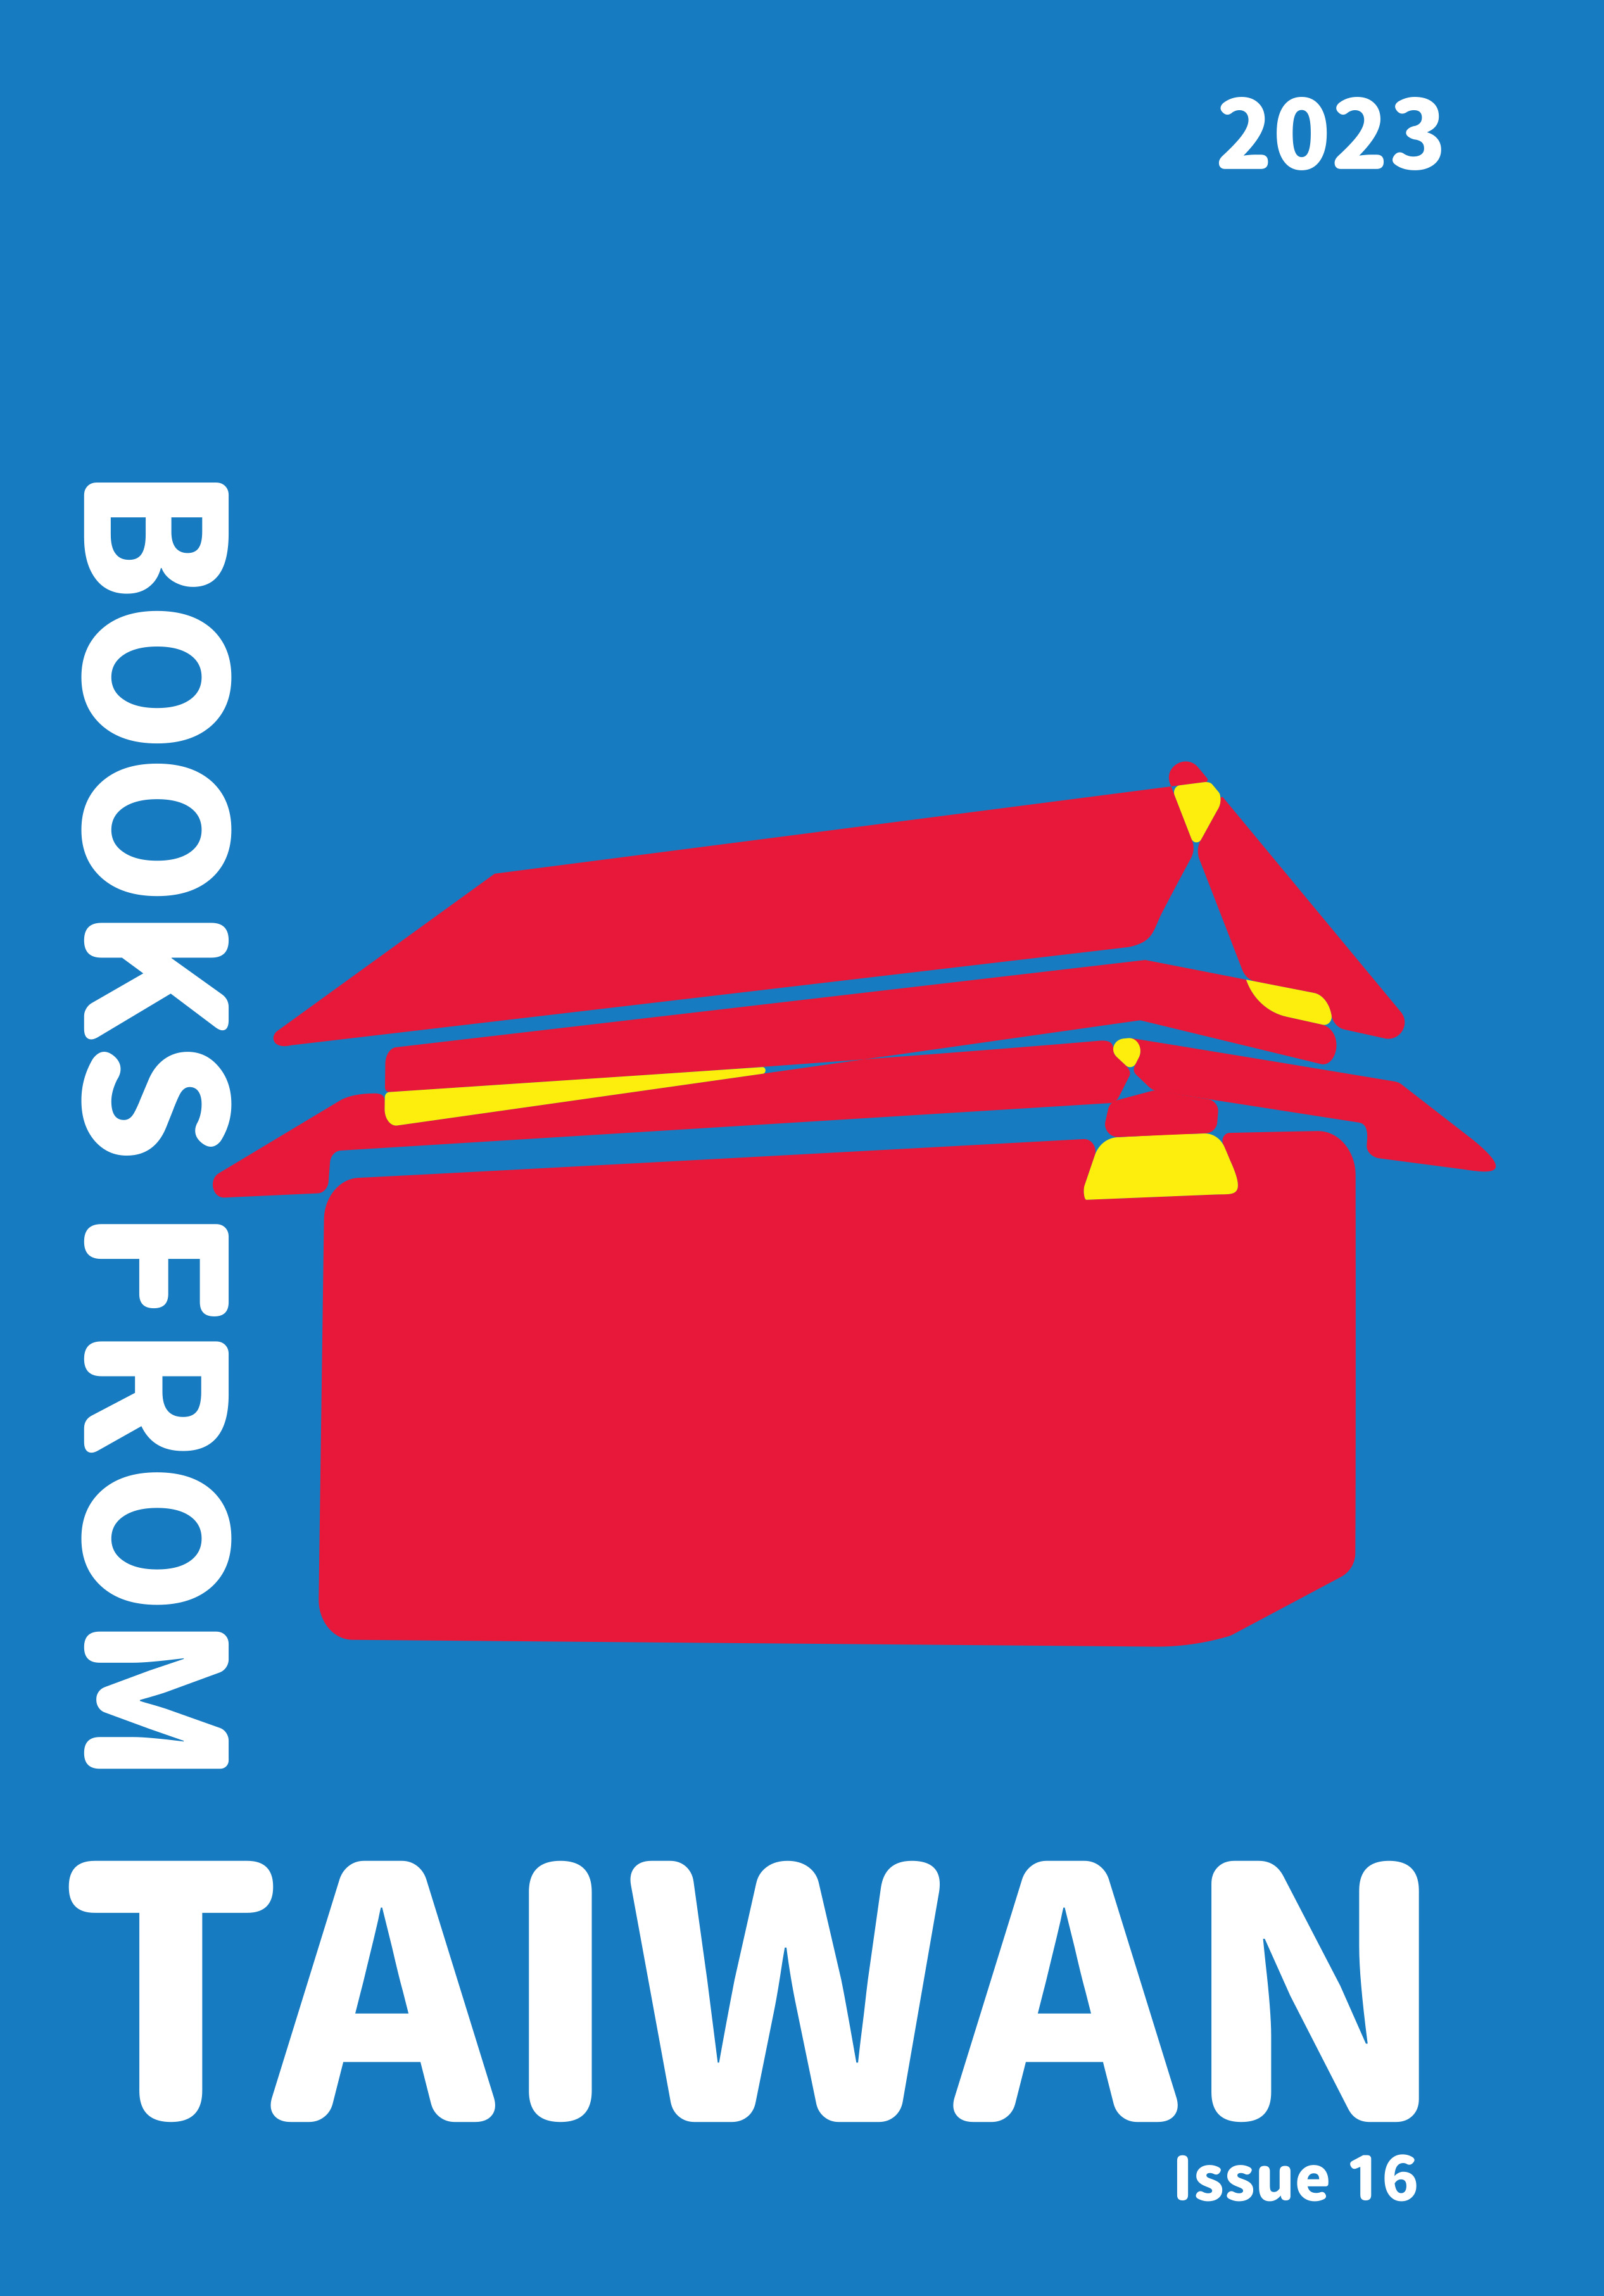 Books from Taiwan Issue 16